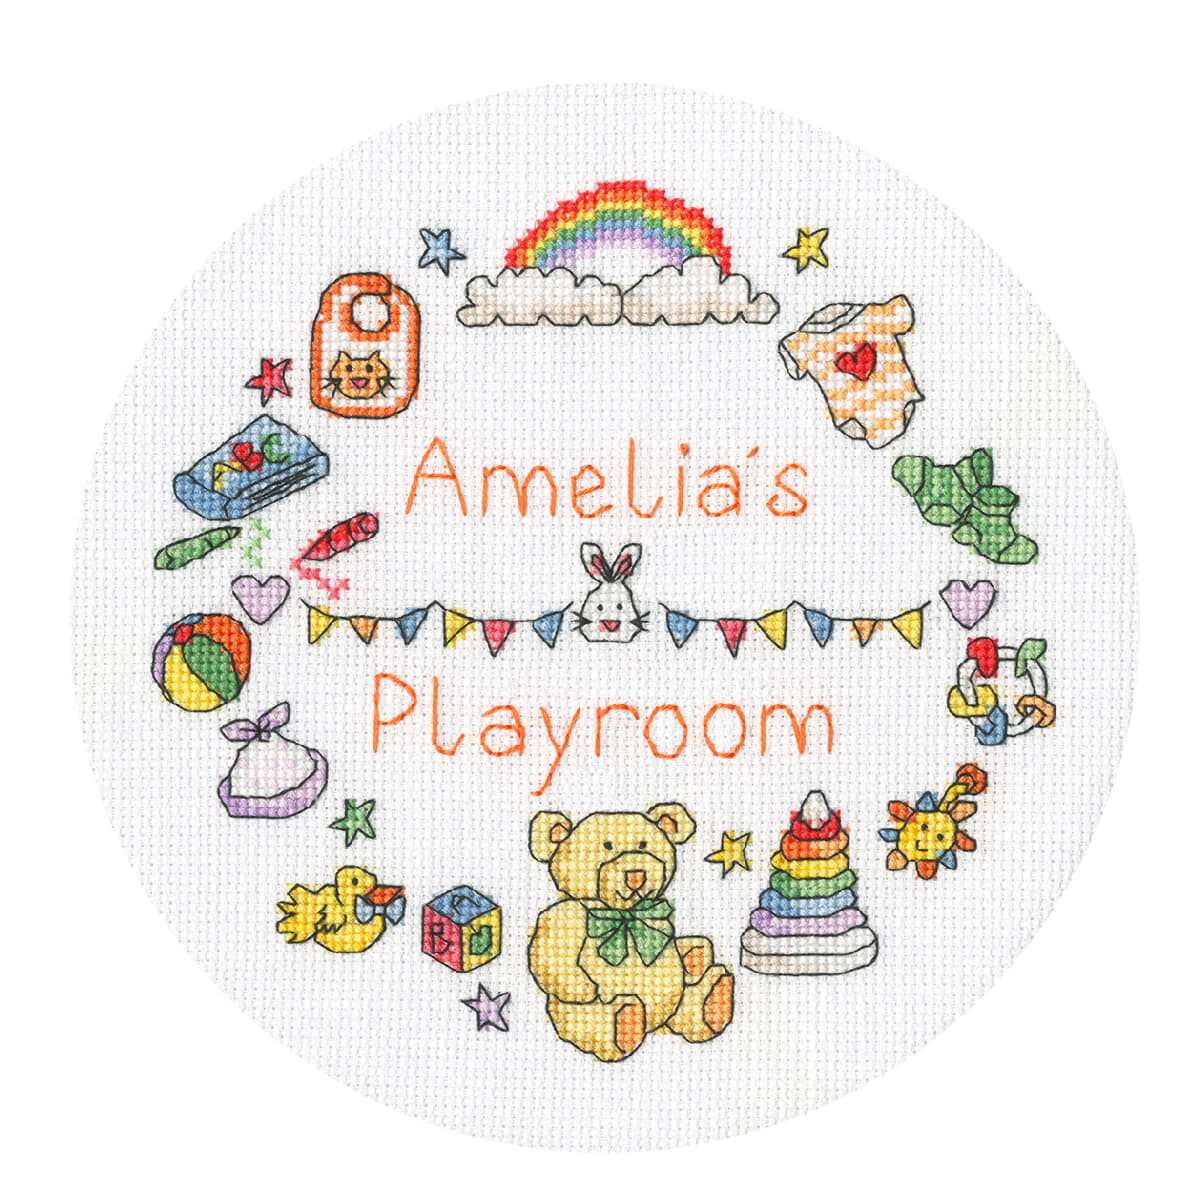 Amelias playroom is written in colorful letters on a...